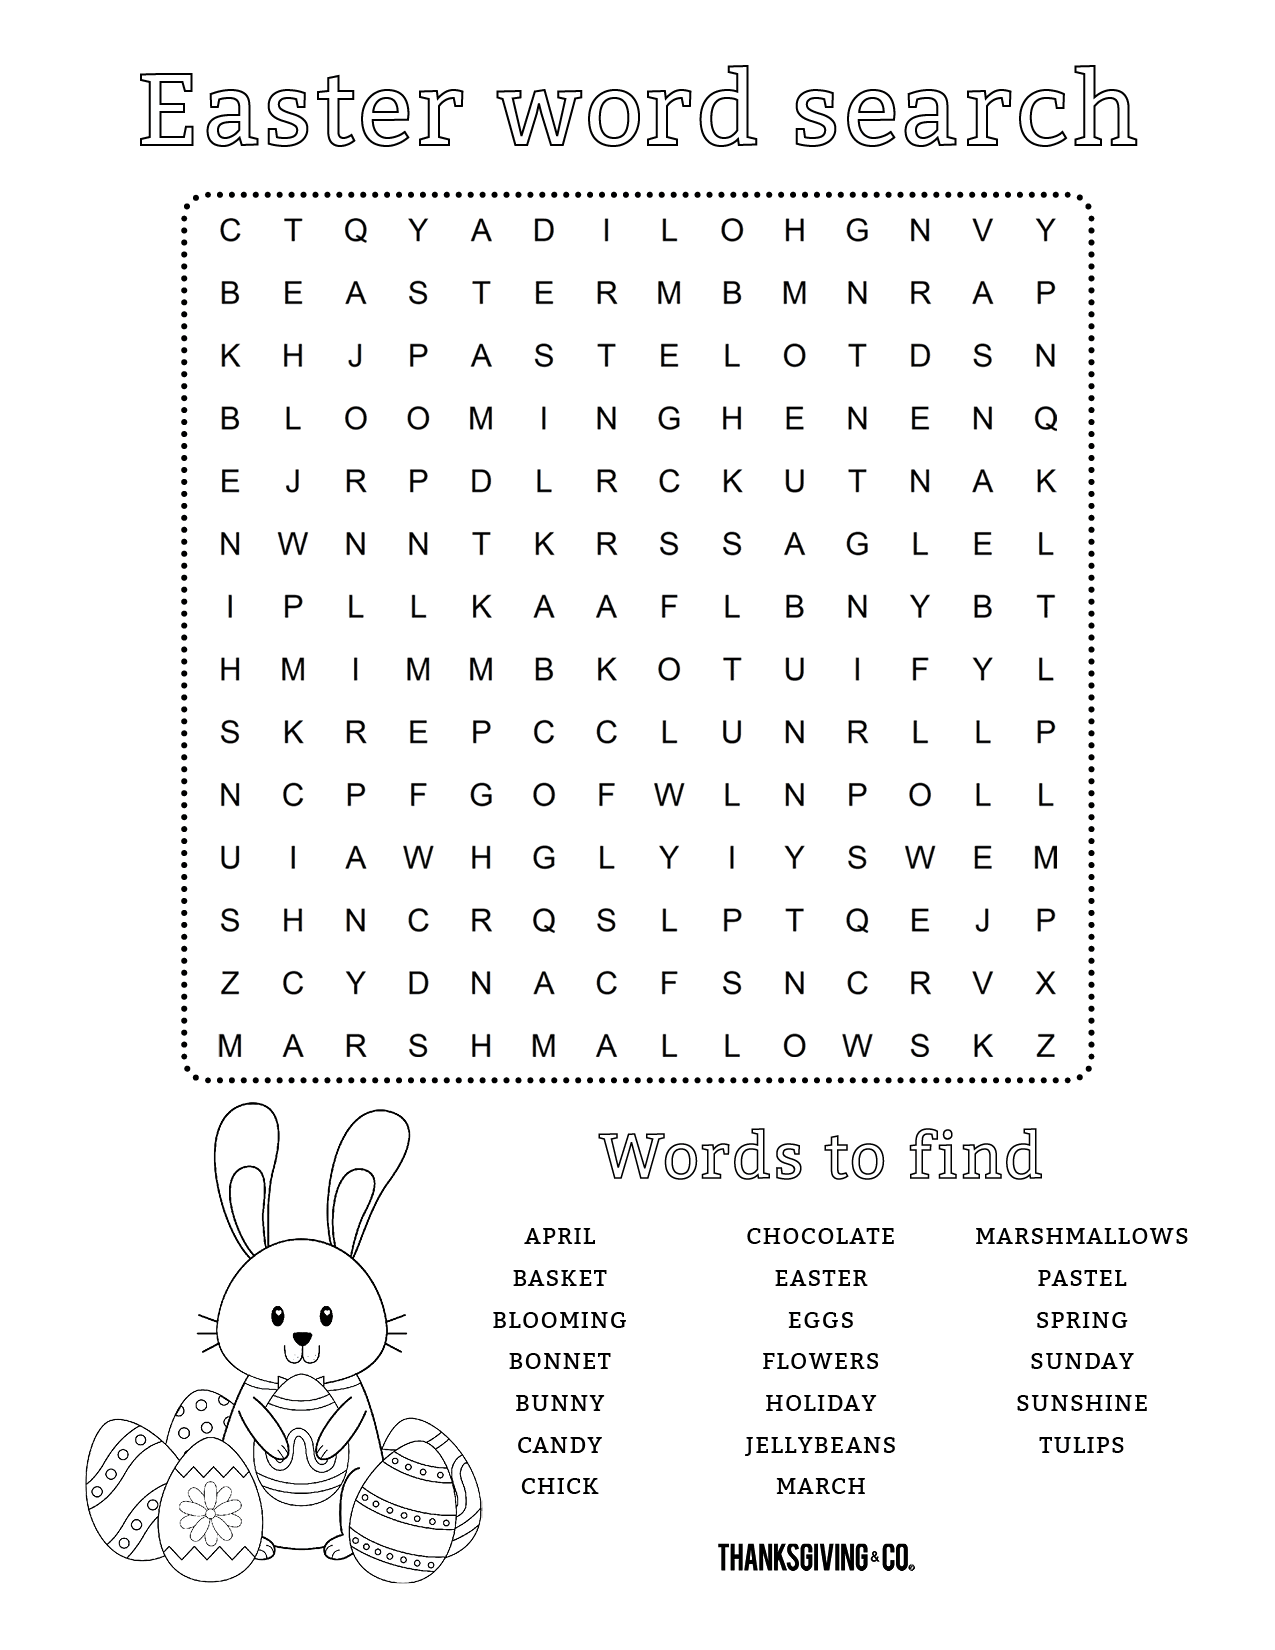 Get a fun & free printable Easter word search